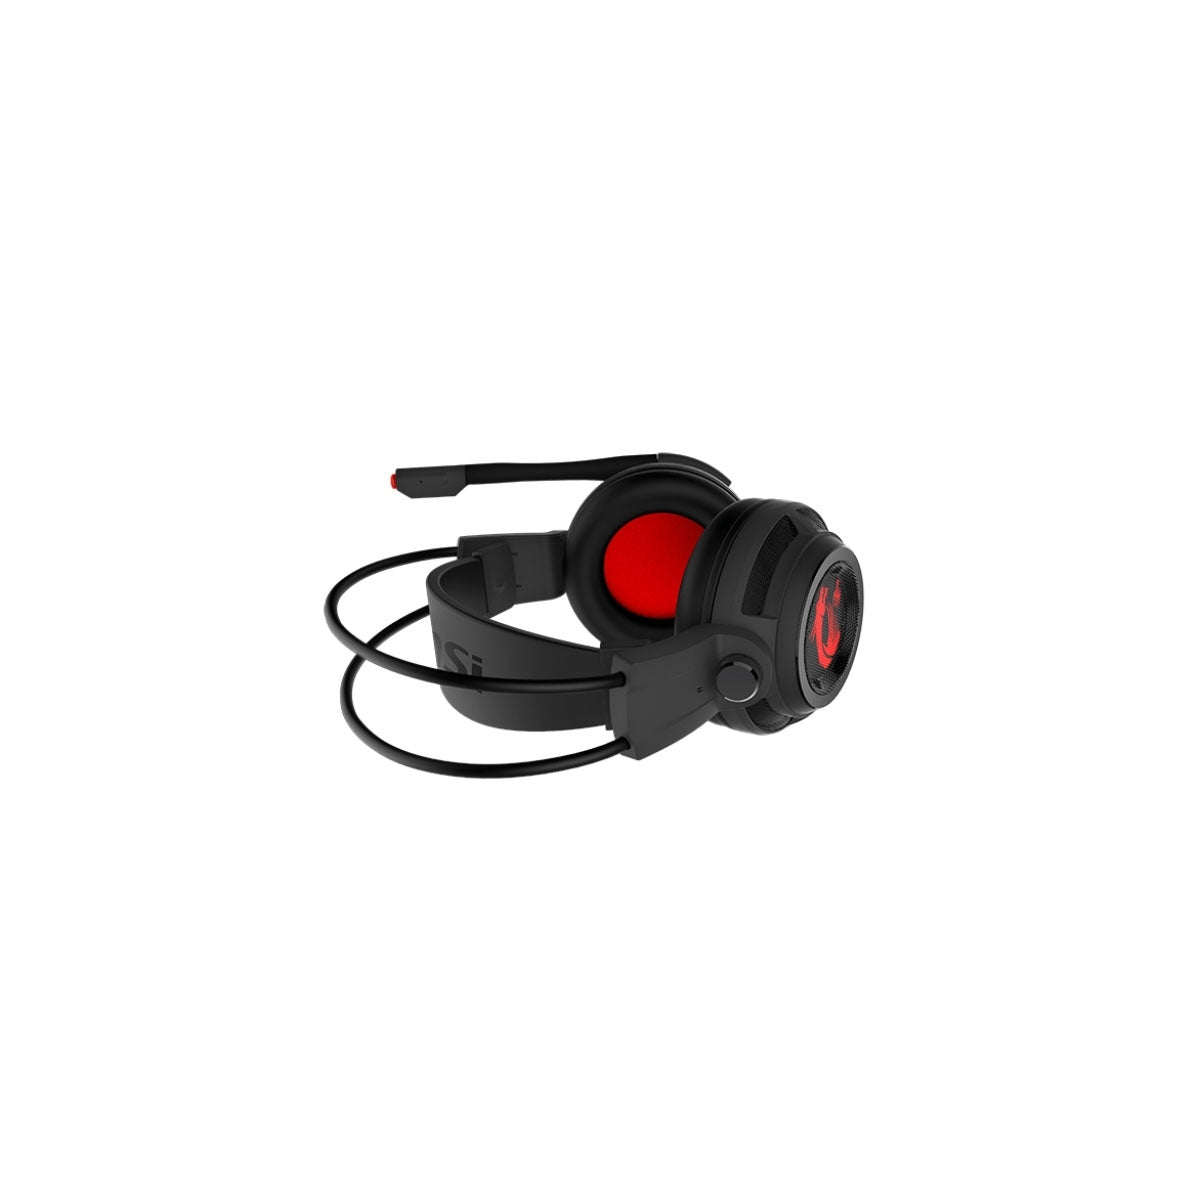 Auriculares Gaming MSI DS502 Usb Surround Virtual 7.1